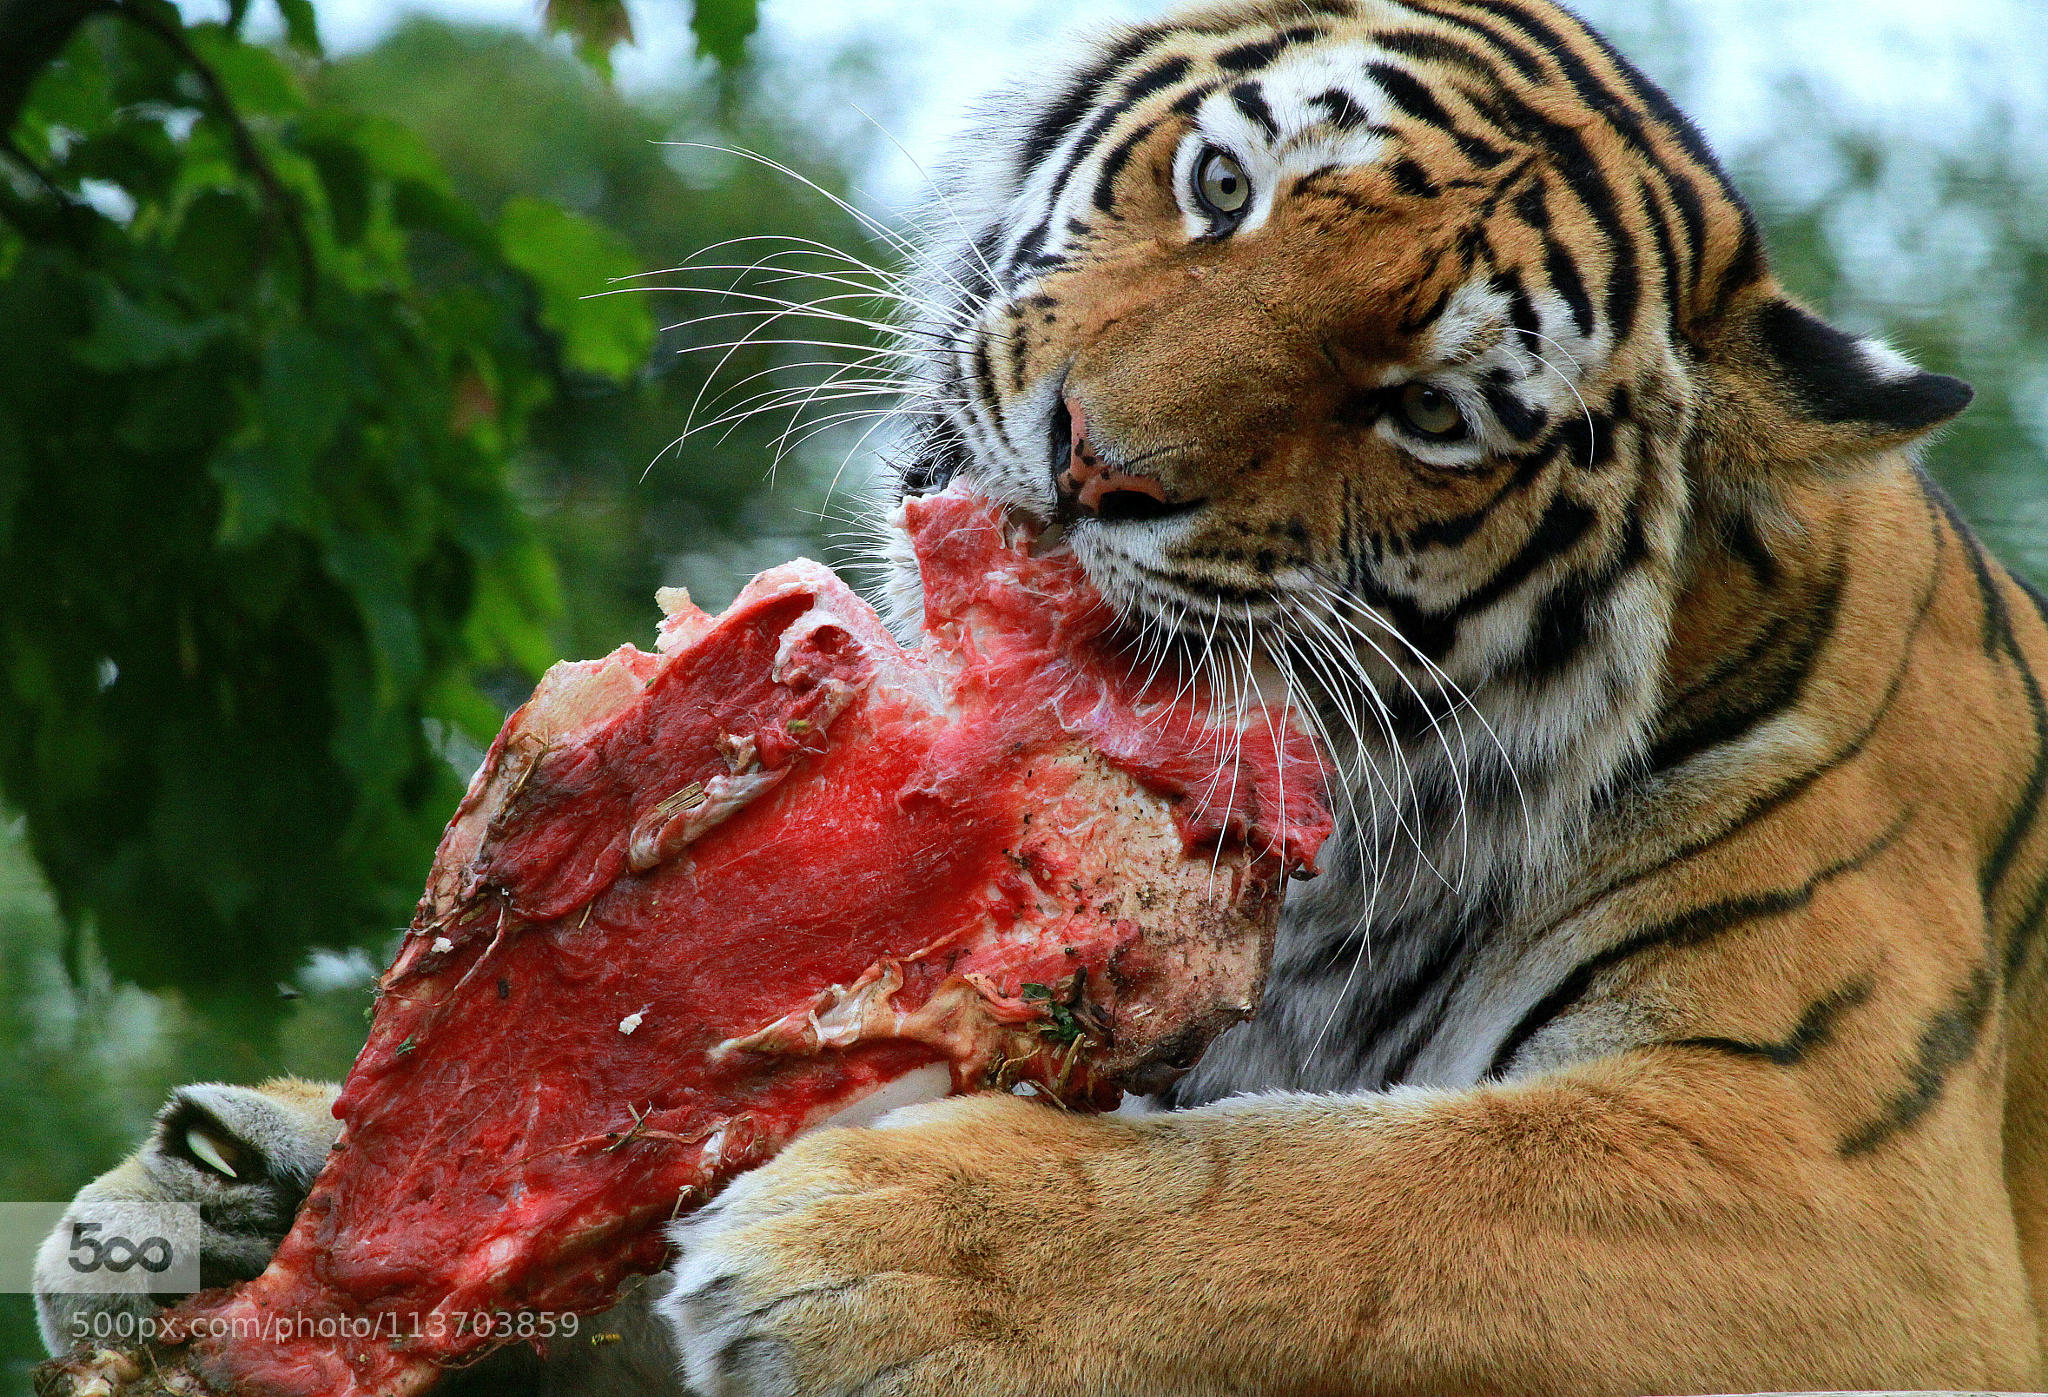 Large piece of meat for a hungry tigress...